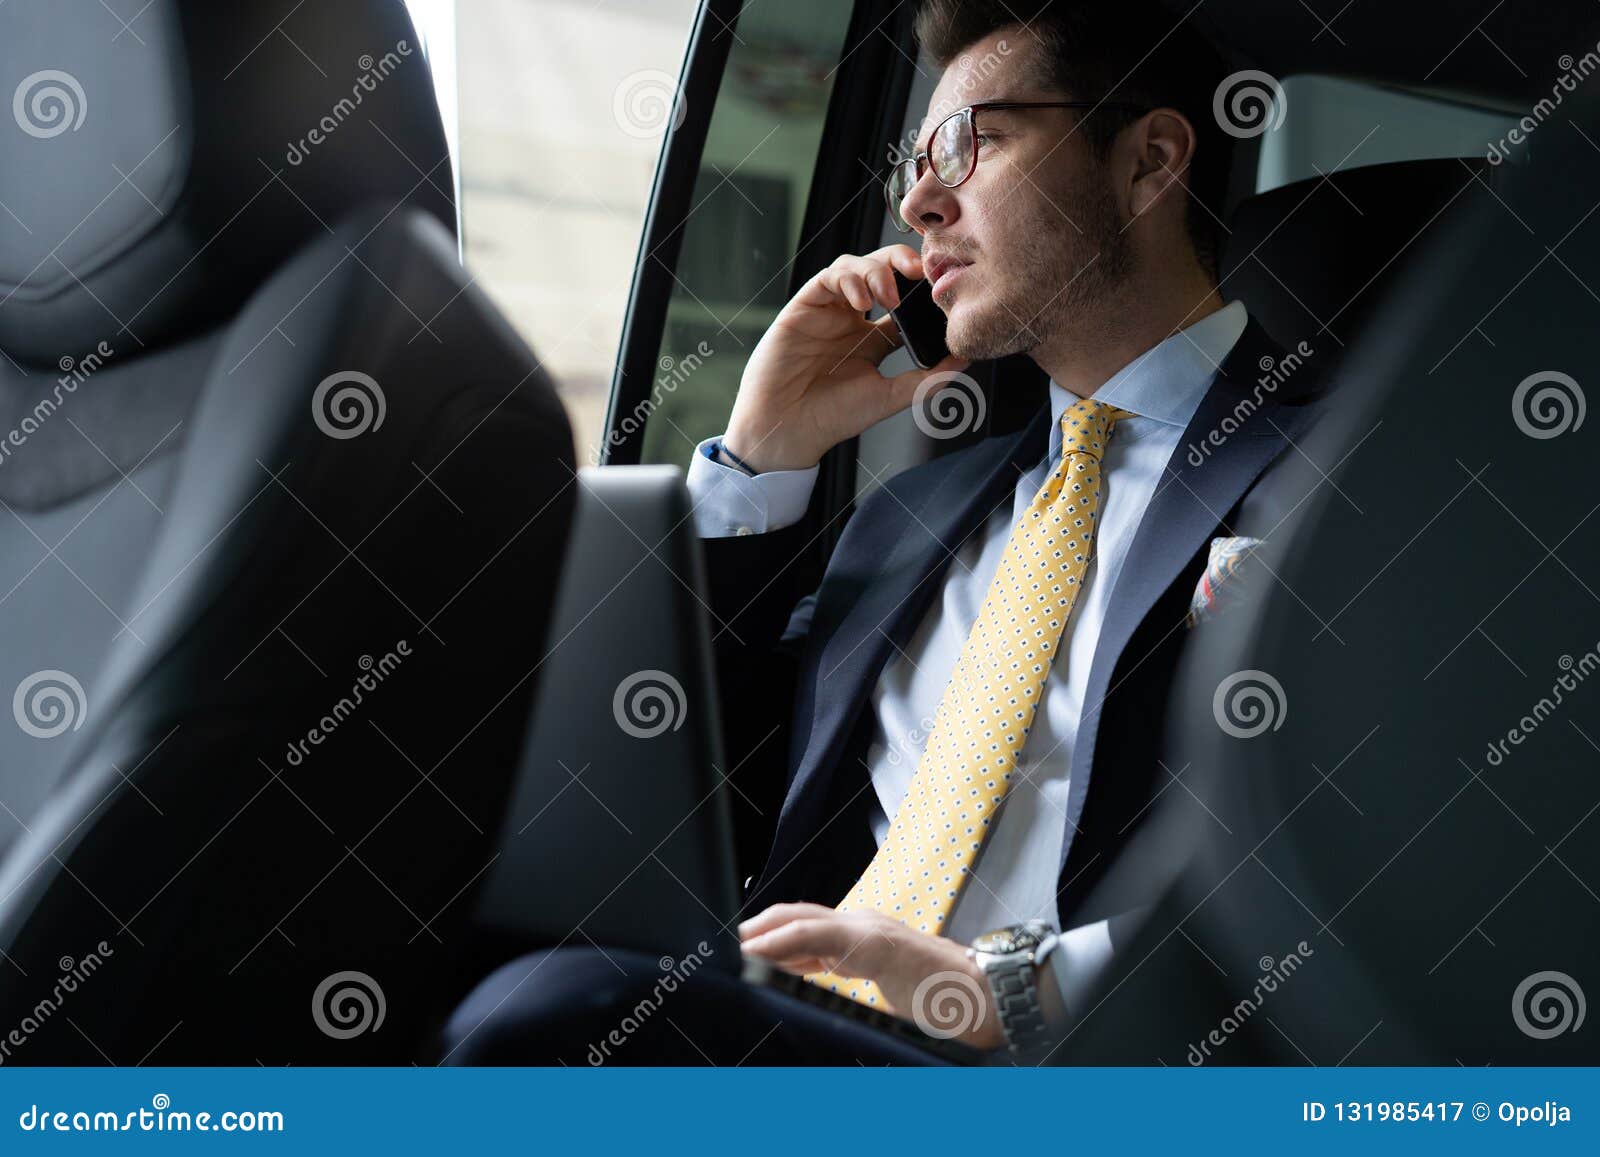 young businessman sitting on back seat of the car, while his chauffeur is driving automobile.